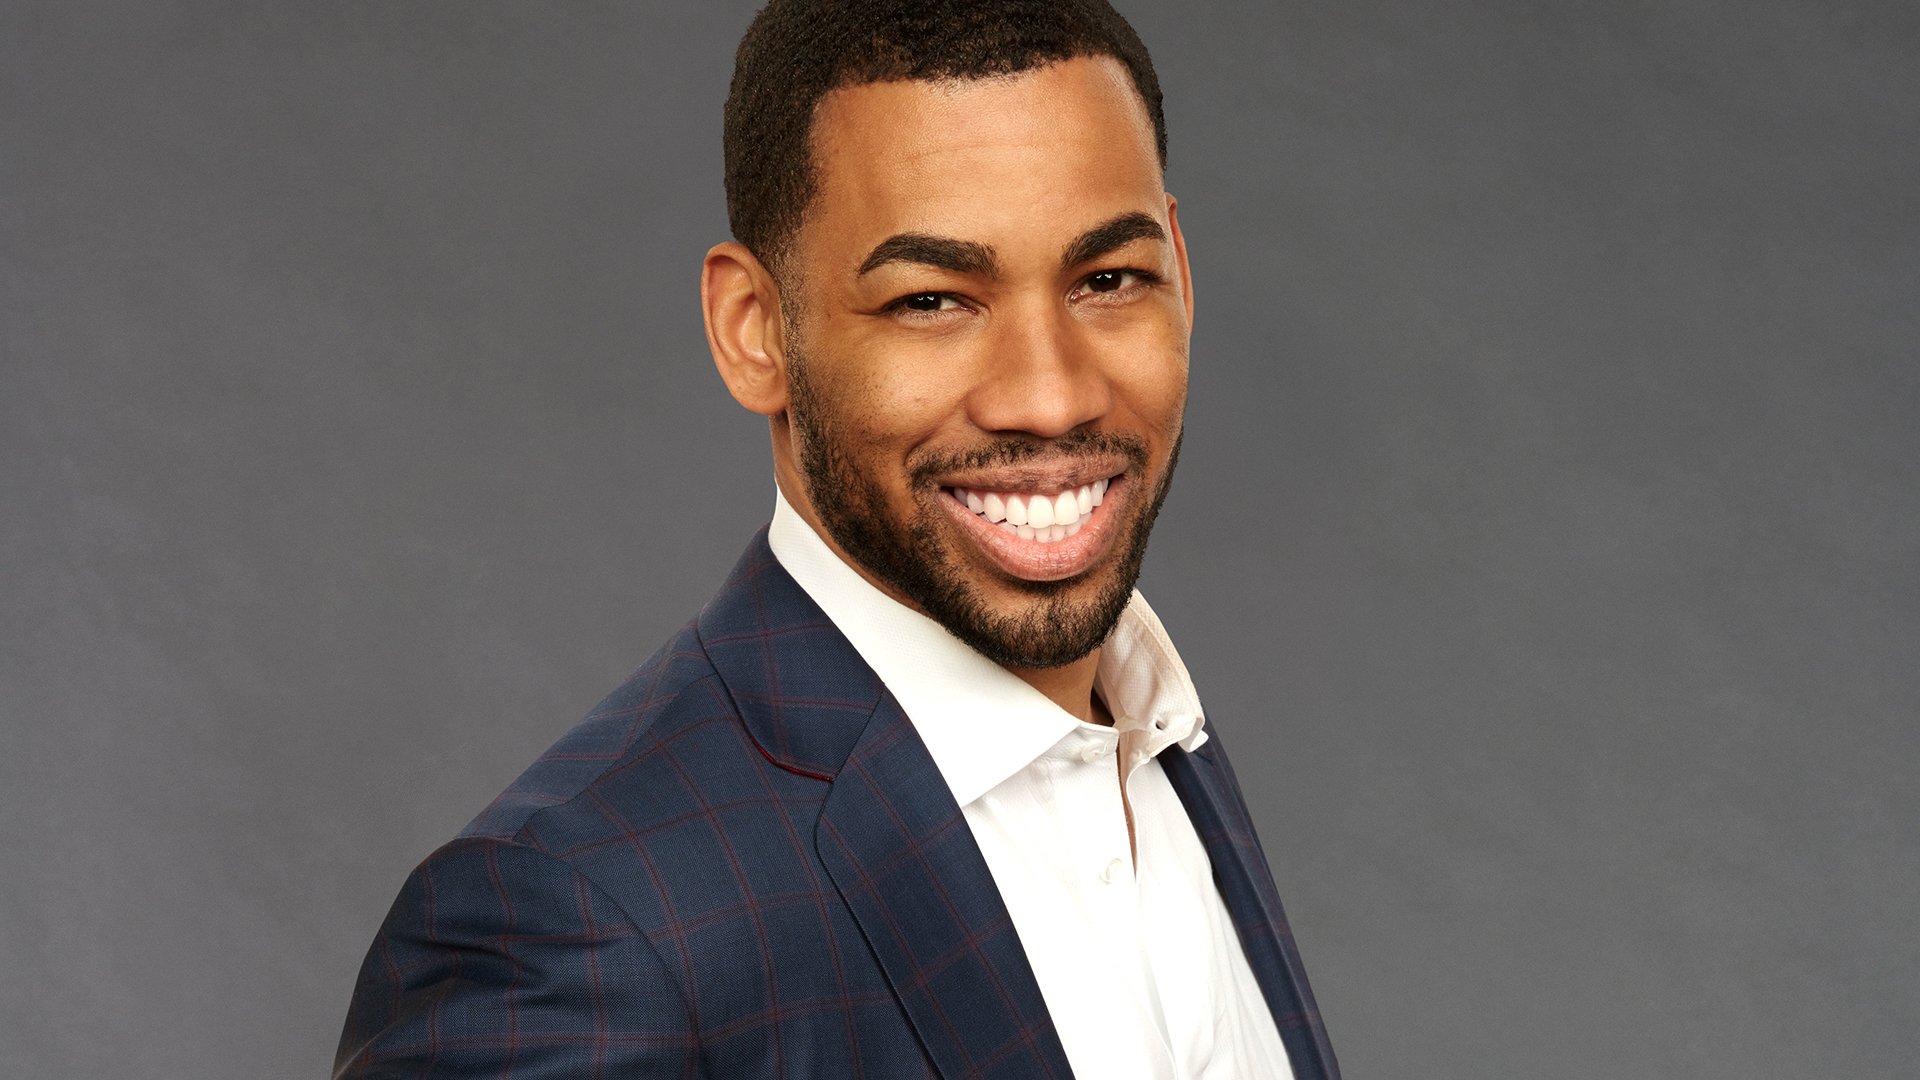 Mike Johnson from 'The Bachelorette' and 'Bachelor in Paradise'